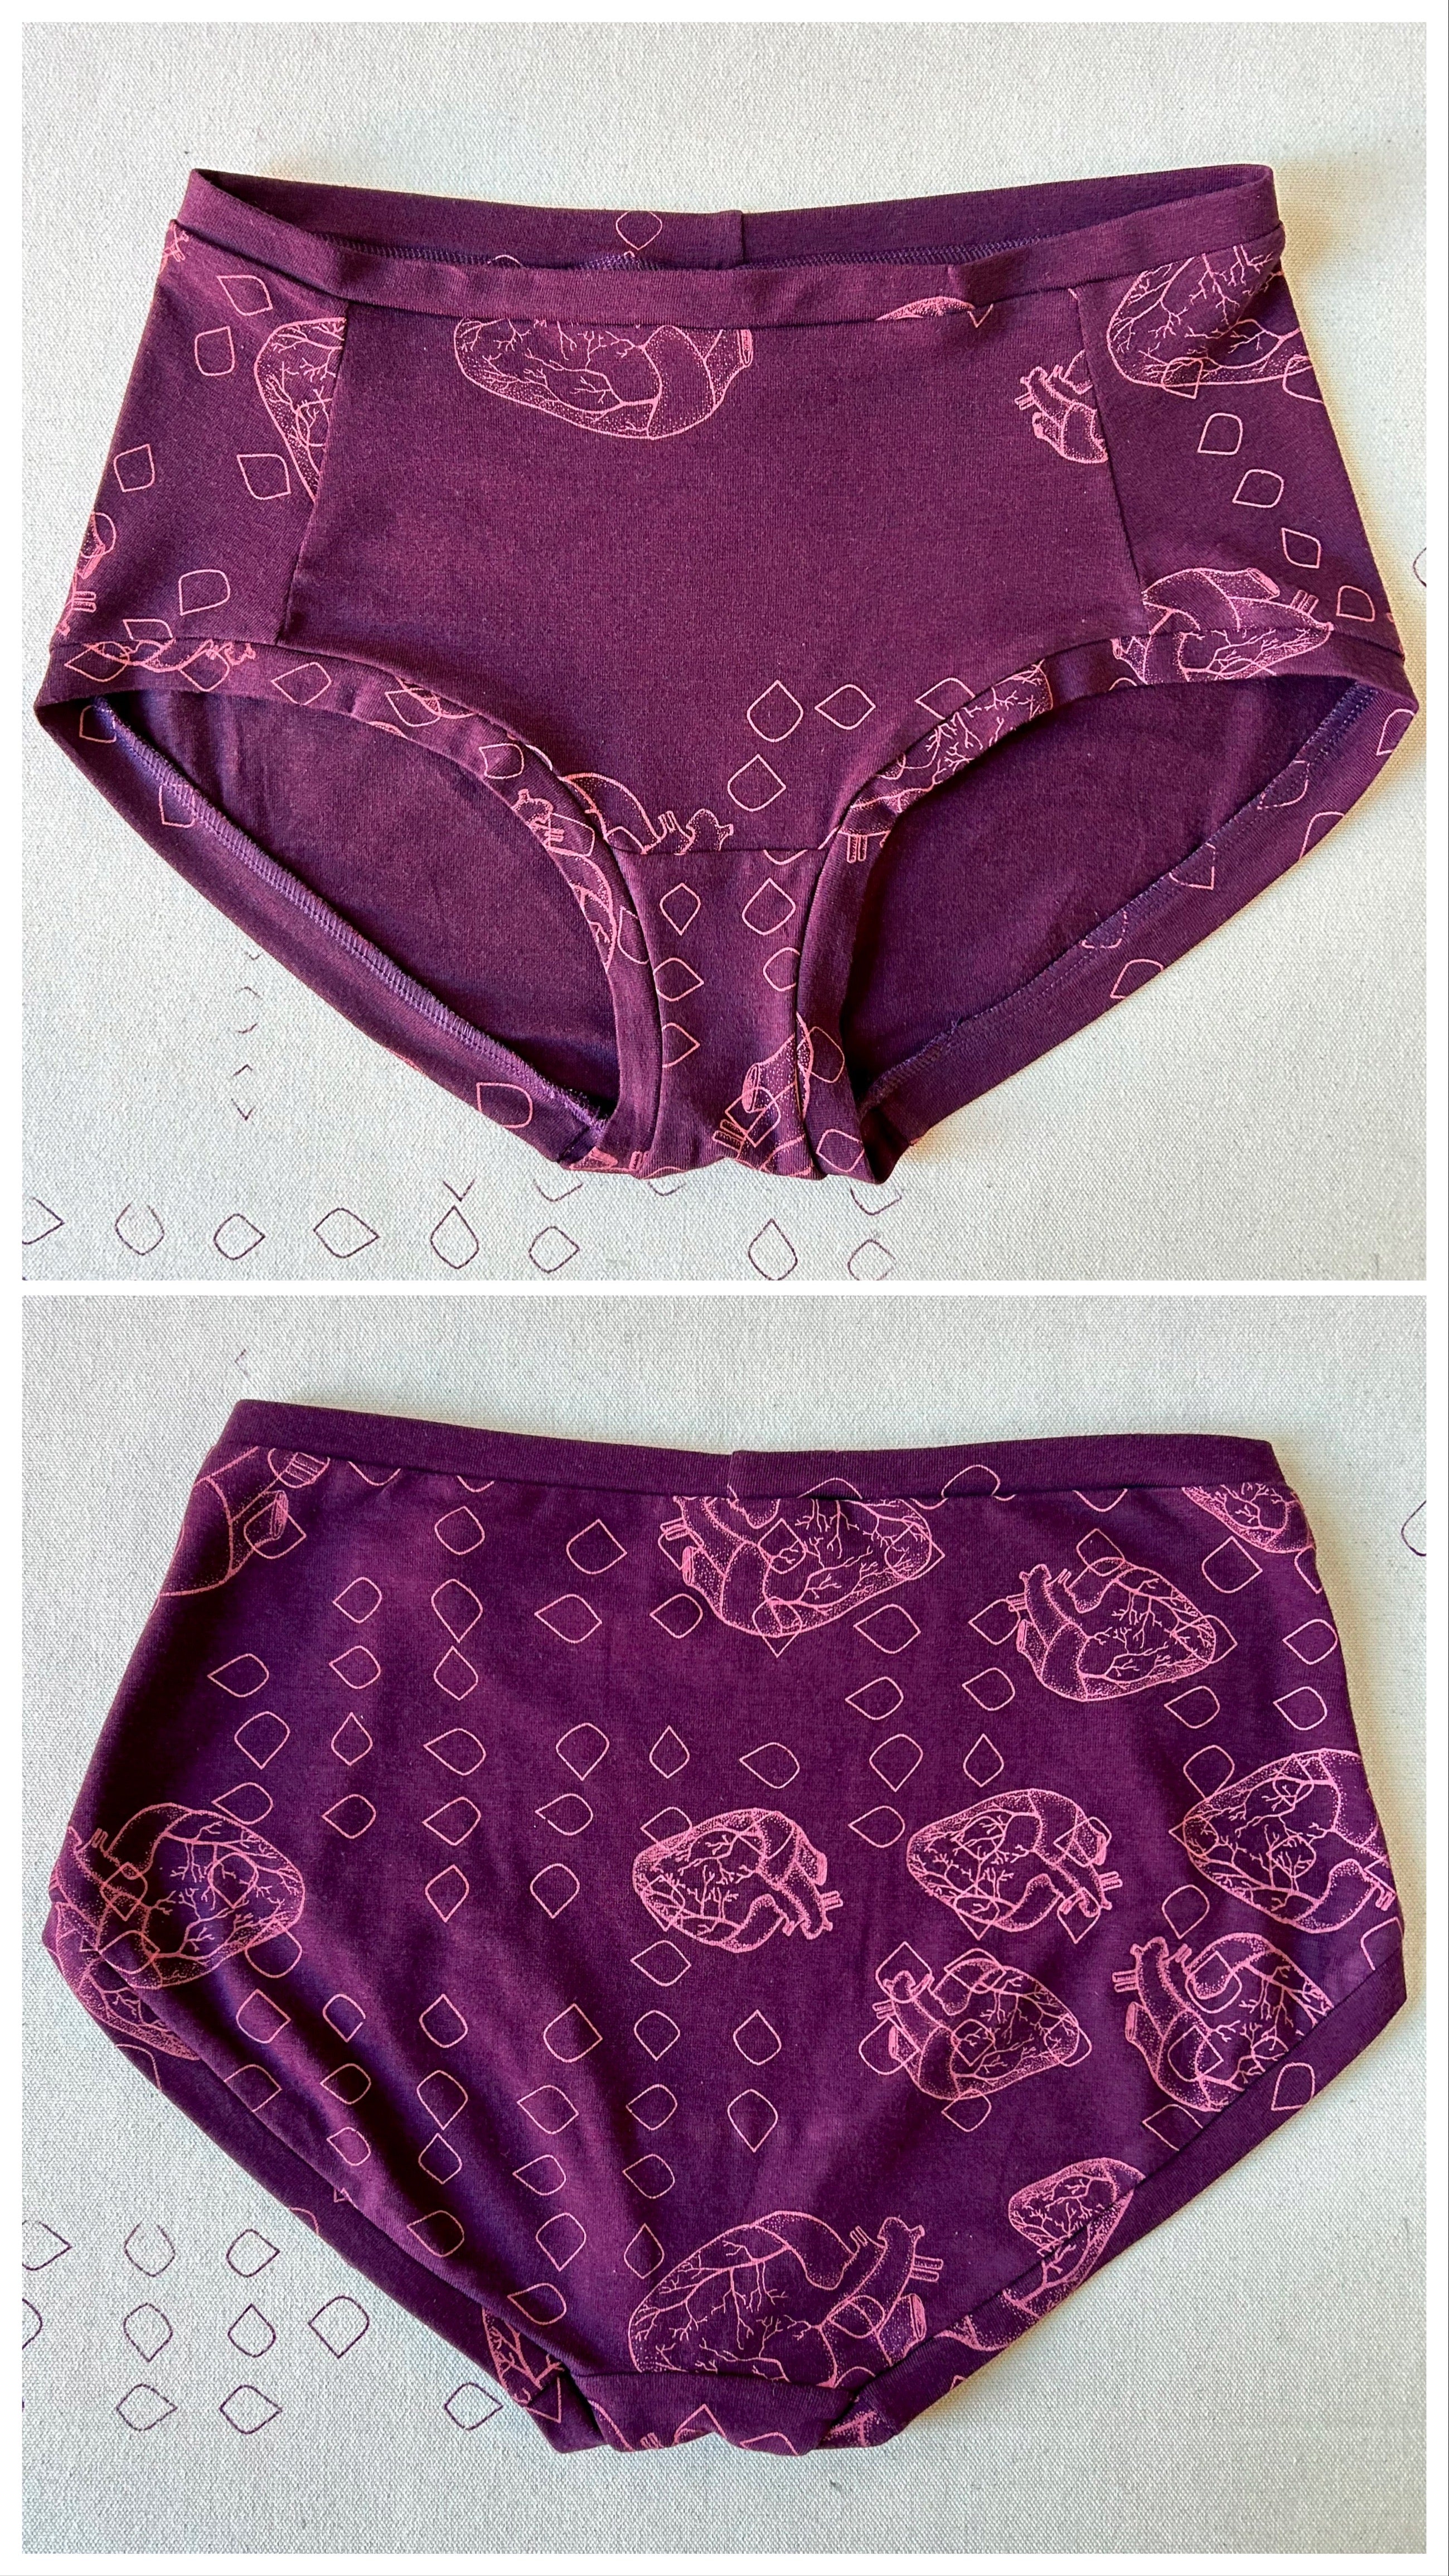 Mid-rise underwear printed with anatomical heart and apple seed pattern